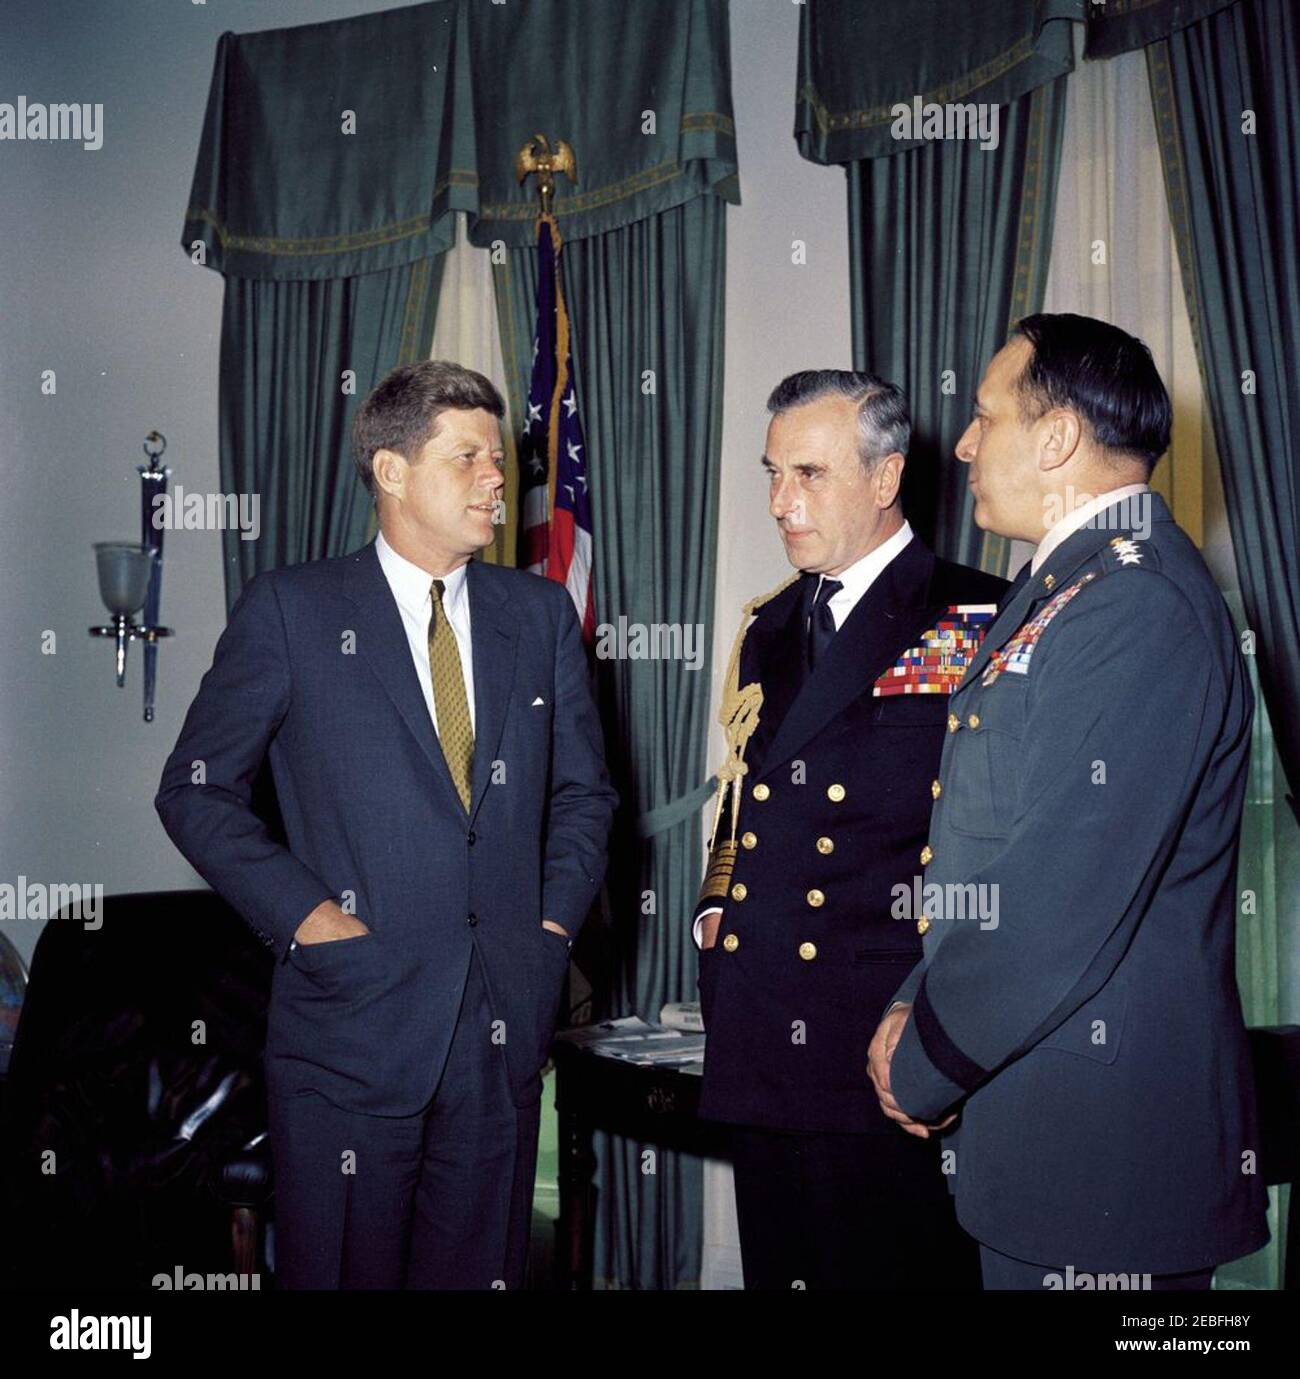 Meeting with Admiral of the Fleet Lord Louis Mountbatten, 1st Earl Mountbatten of Burma, 10:25AM. President John F. Kennedy meets with Chief of the Defense Staff of the British Armed Forces Lord Louis Mountbatten, First Earl Mountbatten of Burma (center) and Chairman of the Joint Chiefs of Staff General Lyman Lemnitzer (right) in the Oval Office, White House, Washington, D.C. Stock Photo